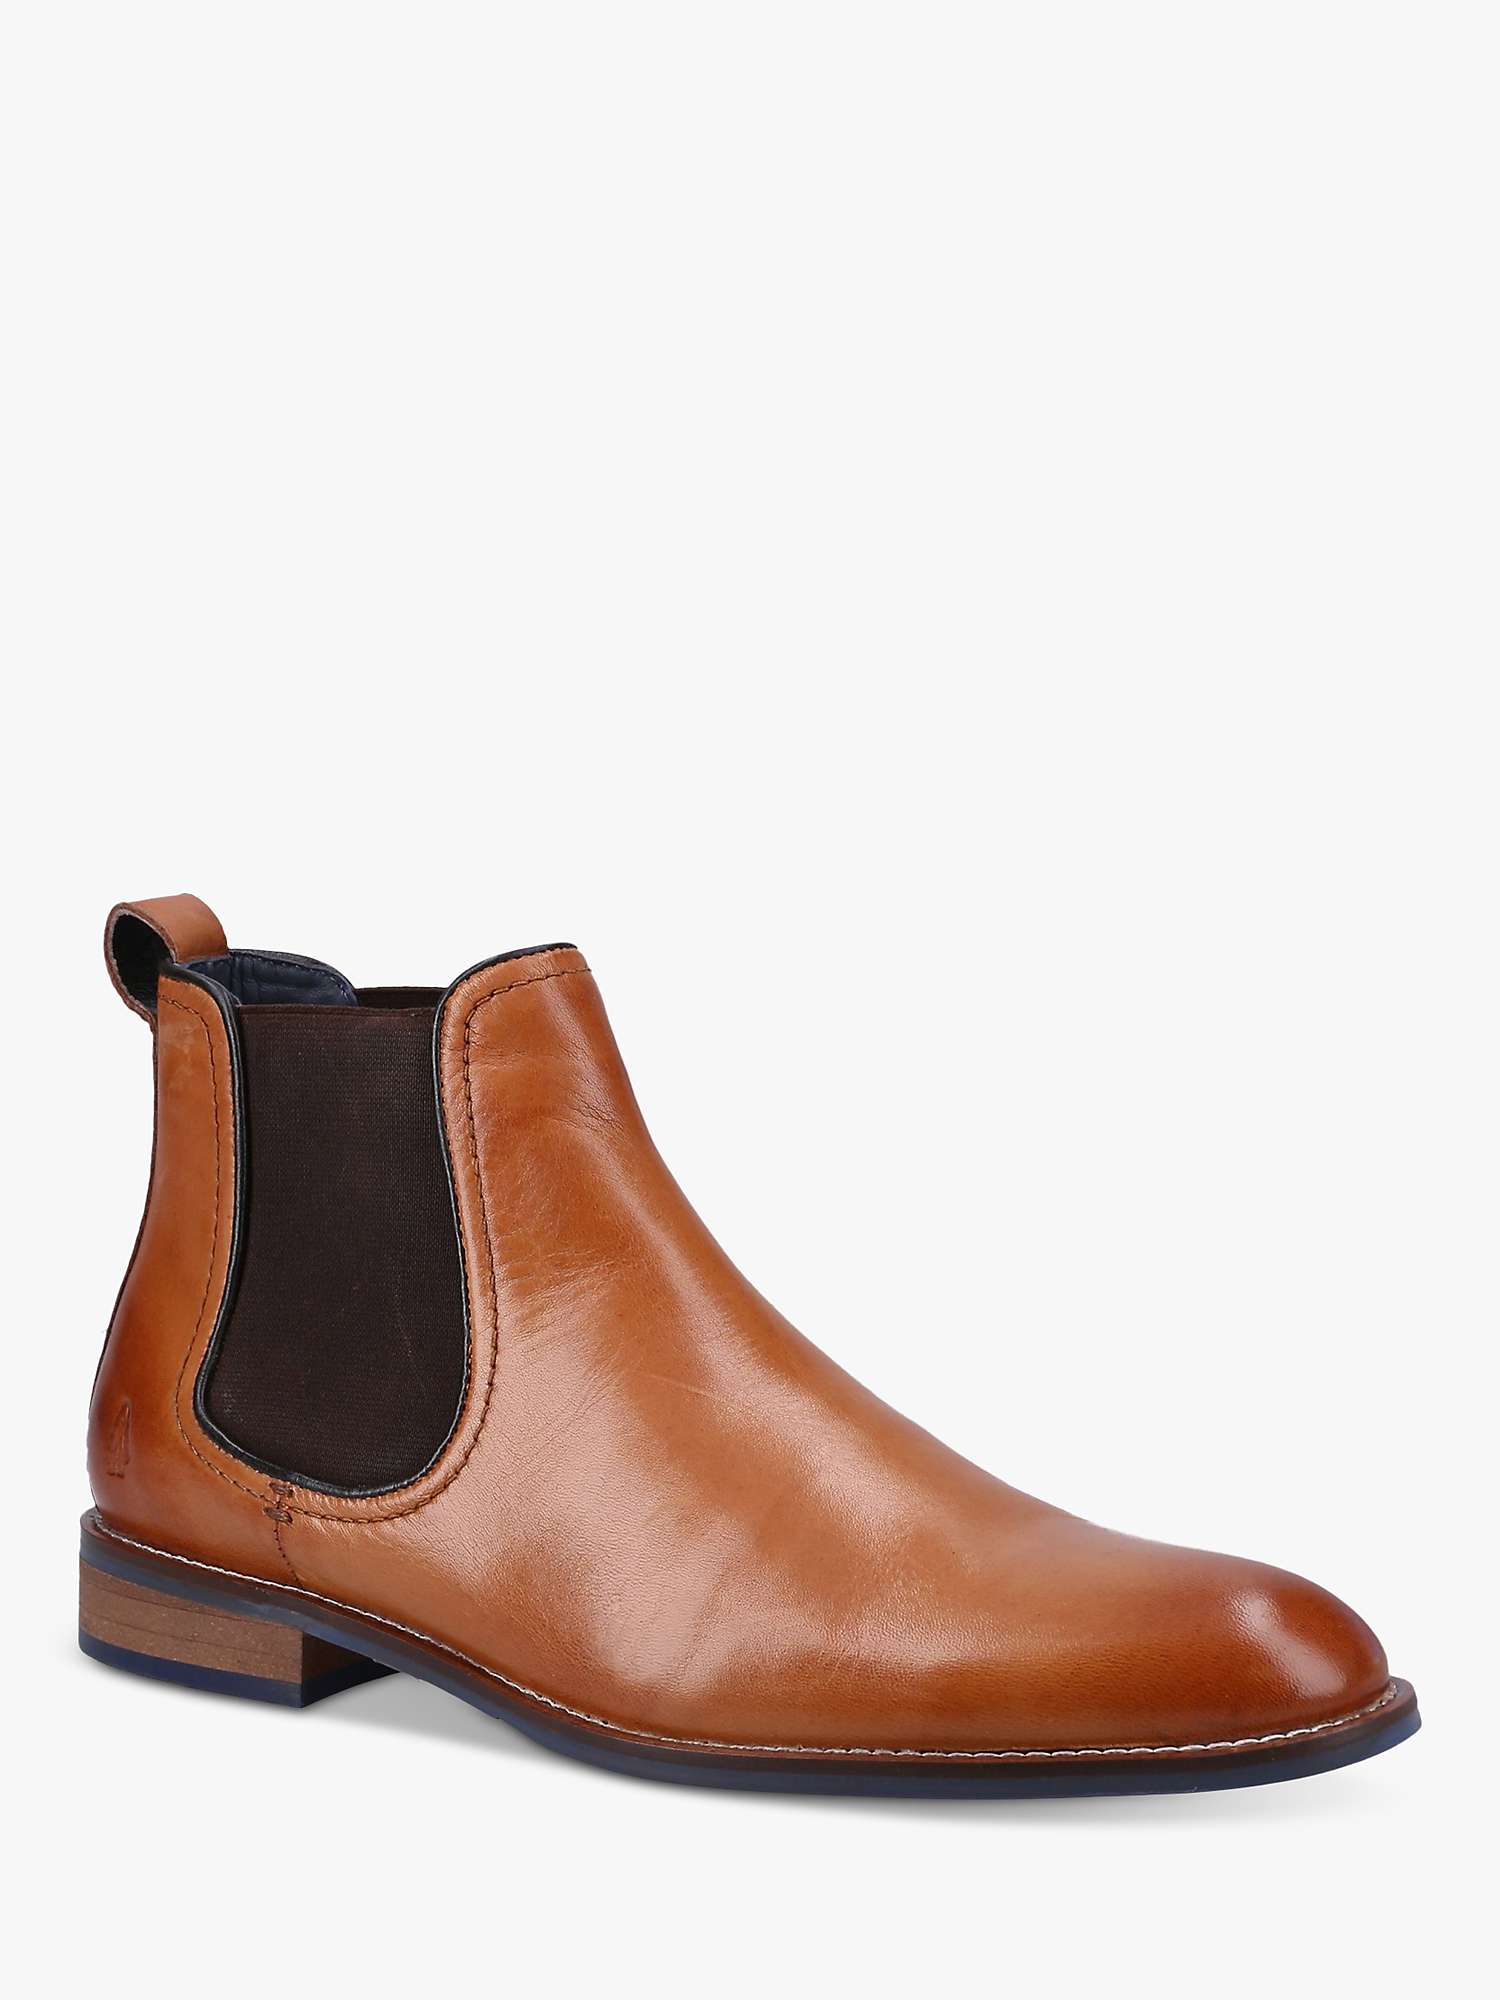 Buy Hush Puppies Diego Leather Chelsea Boots Online at johnlewis.com